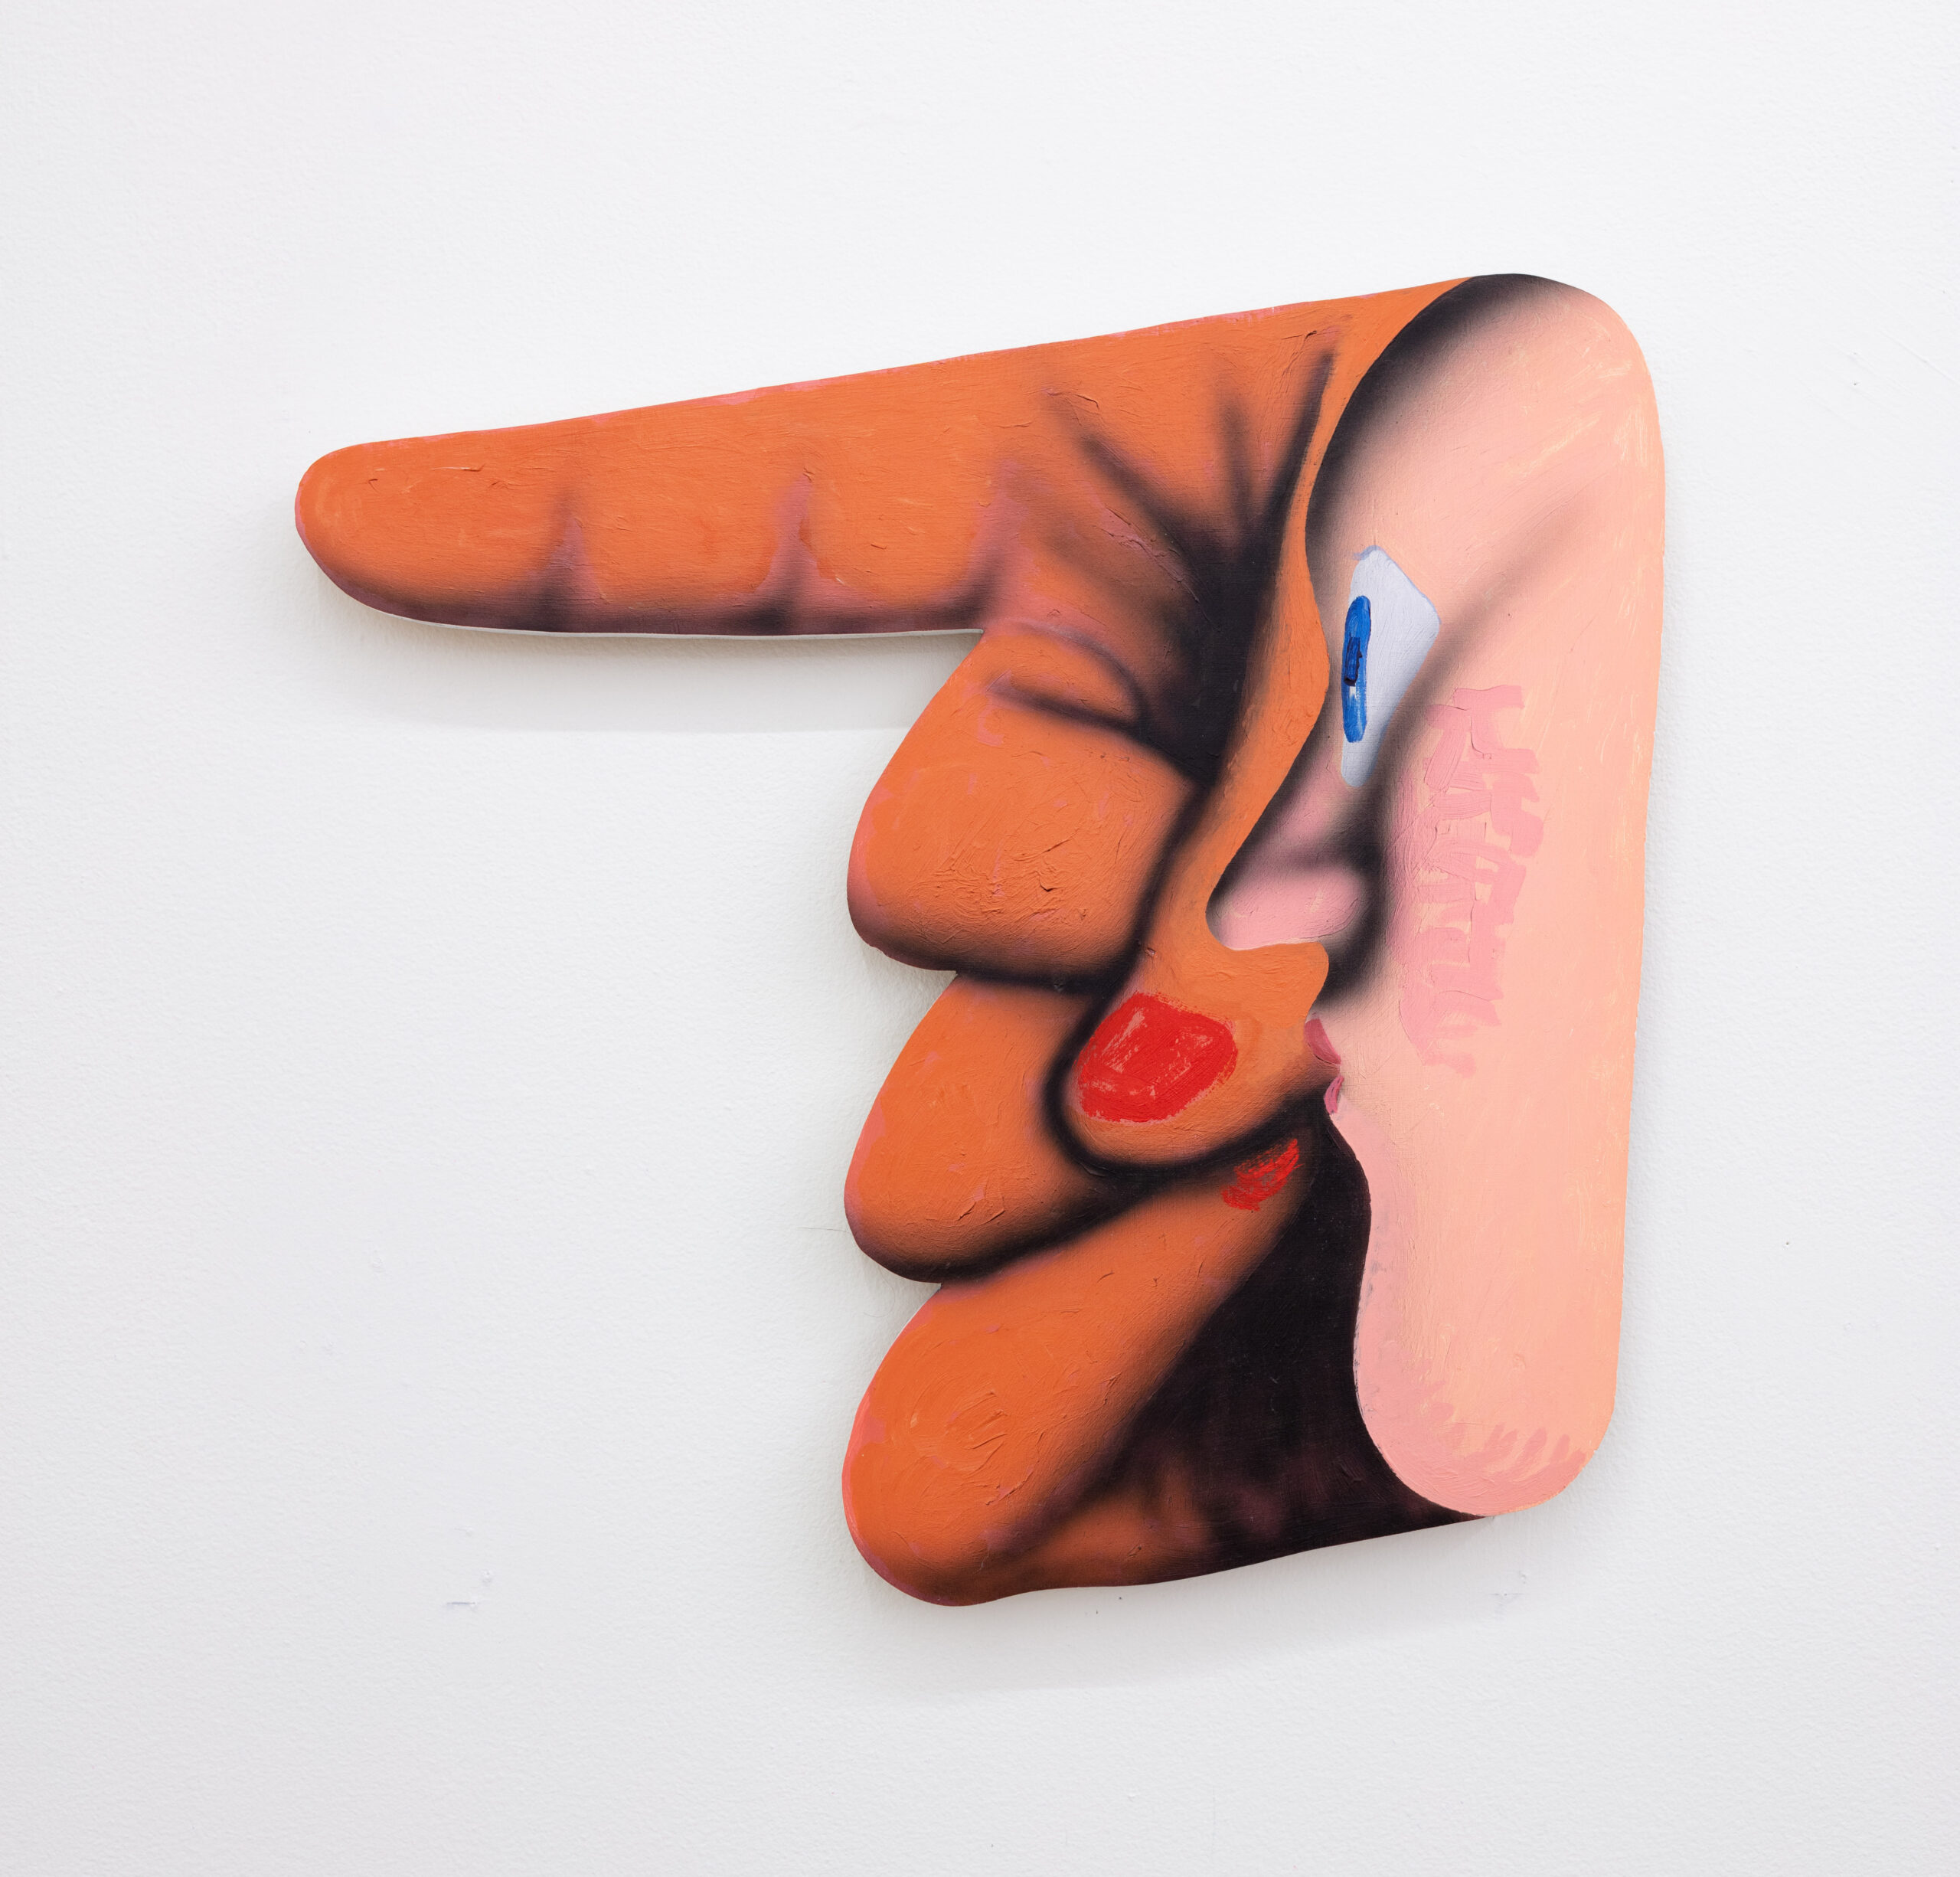 James English Leary, Pointer (1), 2020, acrylic on shaped panel, 23 x 24.5 in.